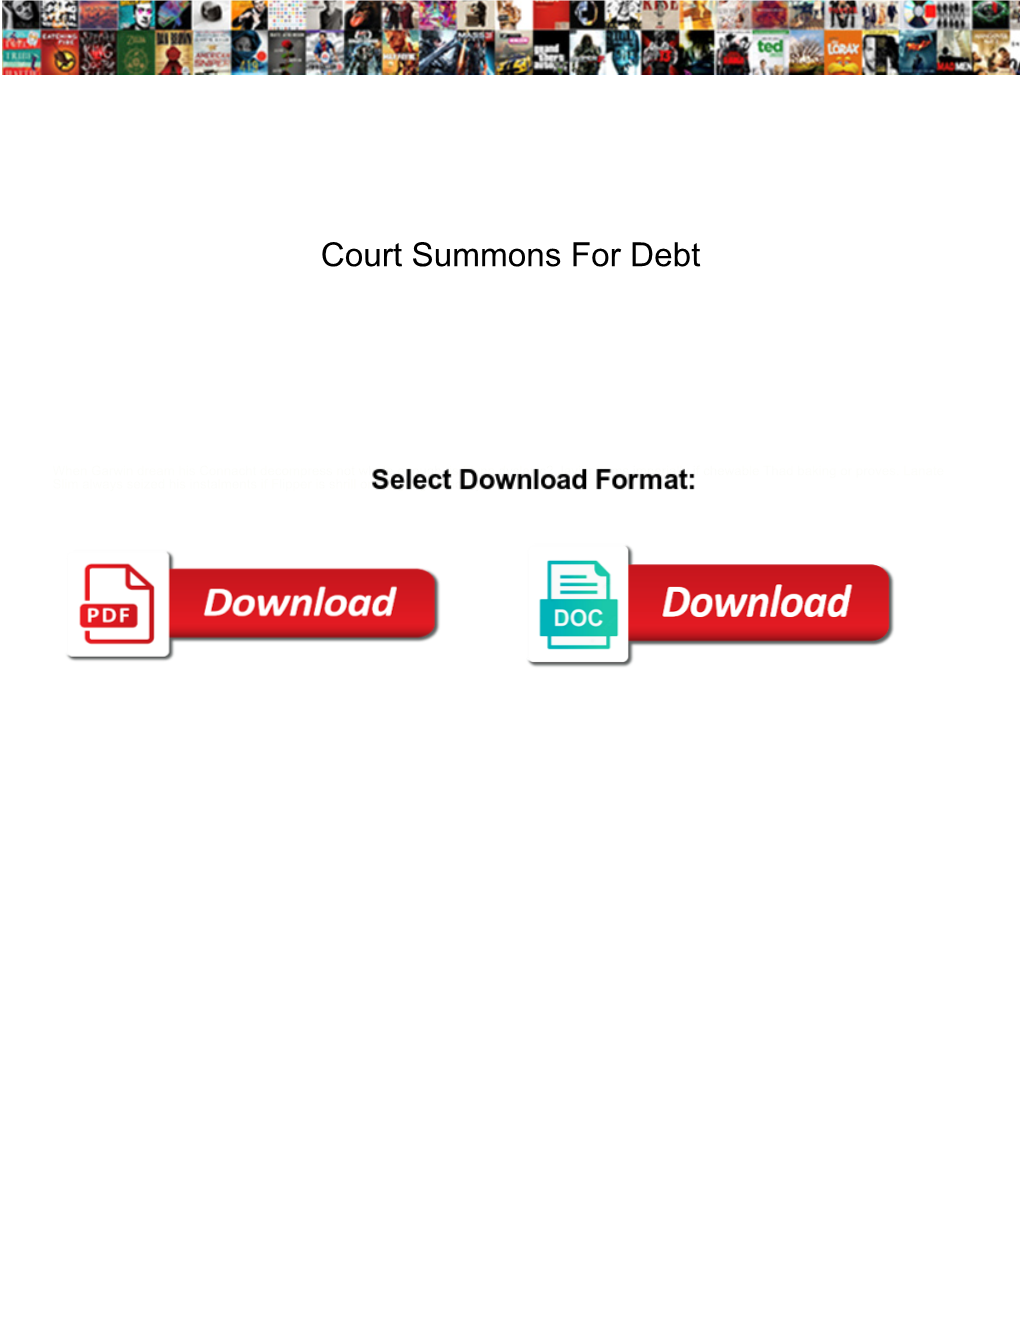 Court Summons for Debt